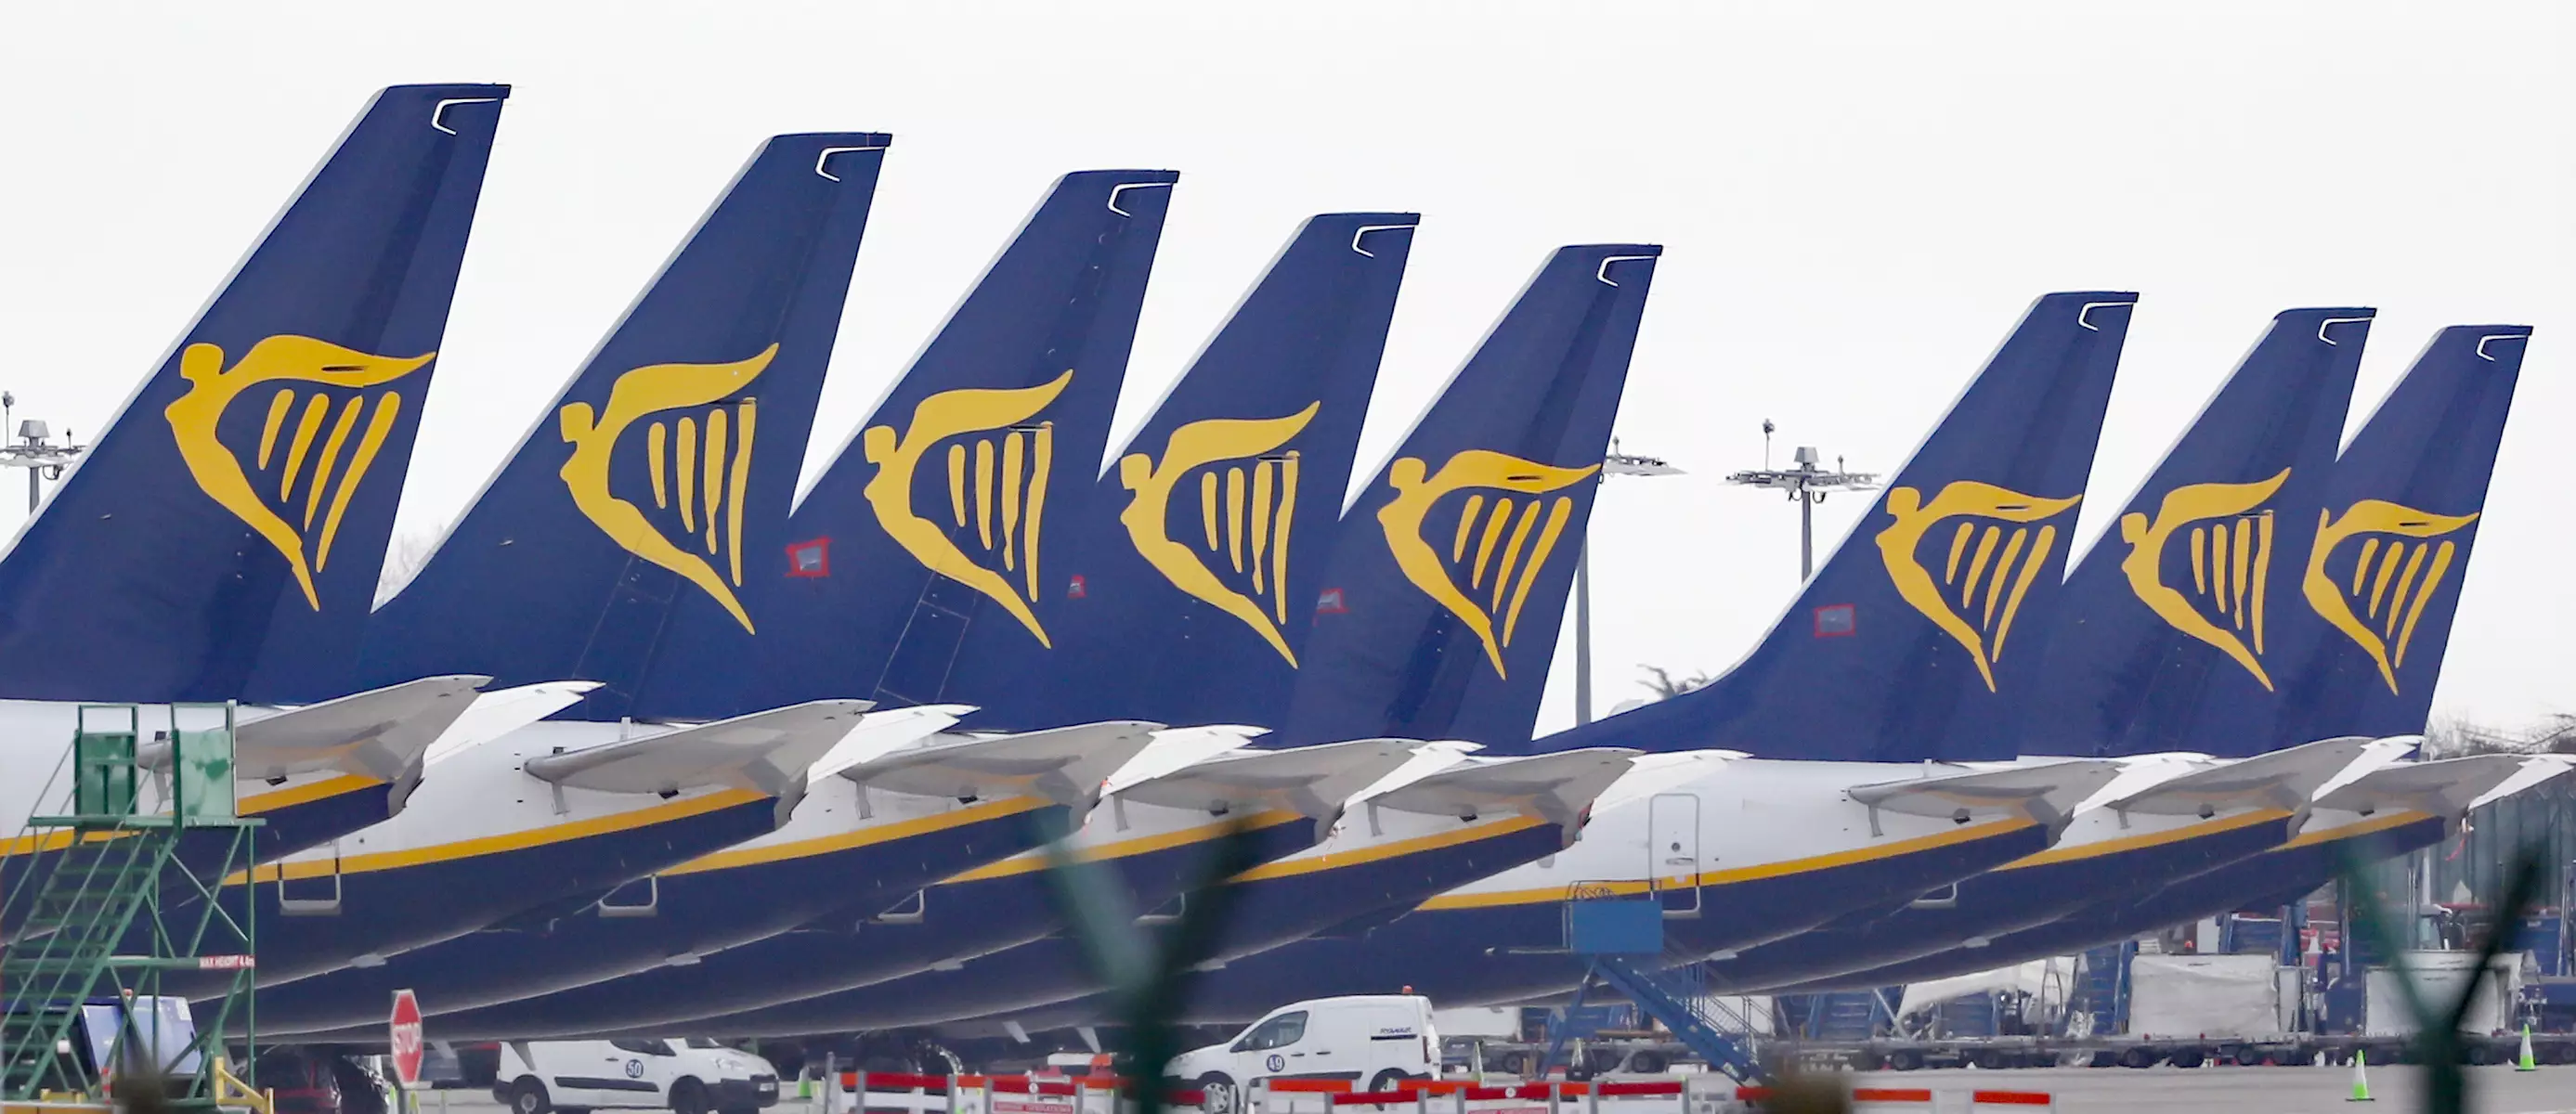 A number of RyanAir flights have been grounded throughout the pandemic (